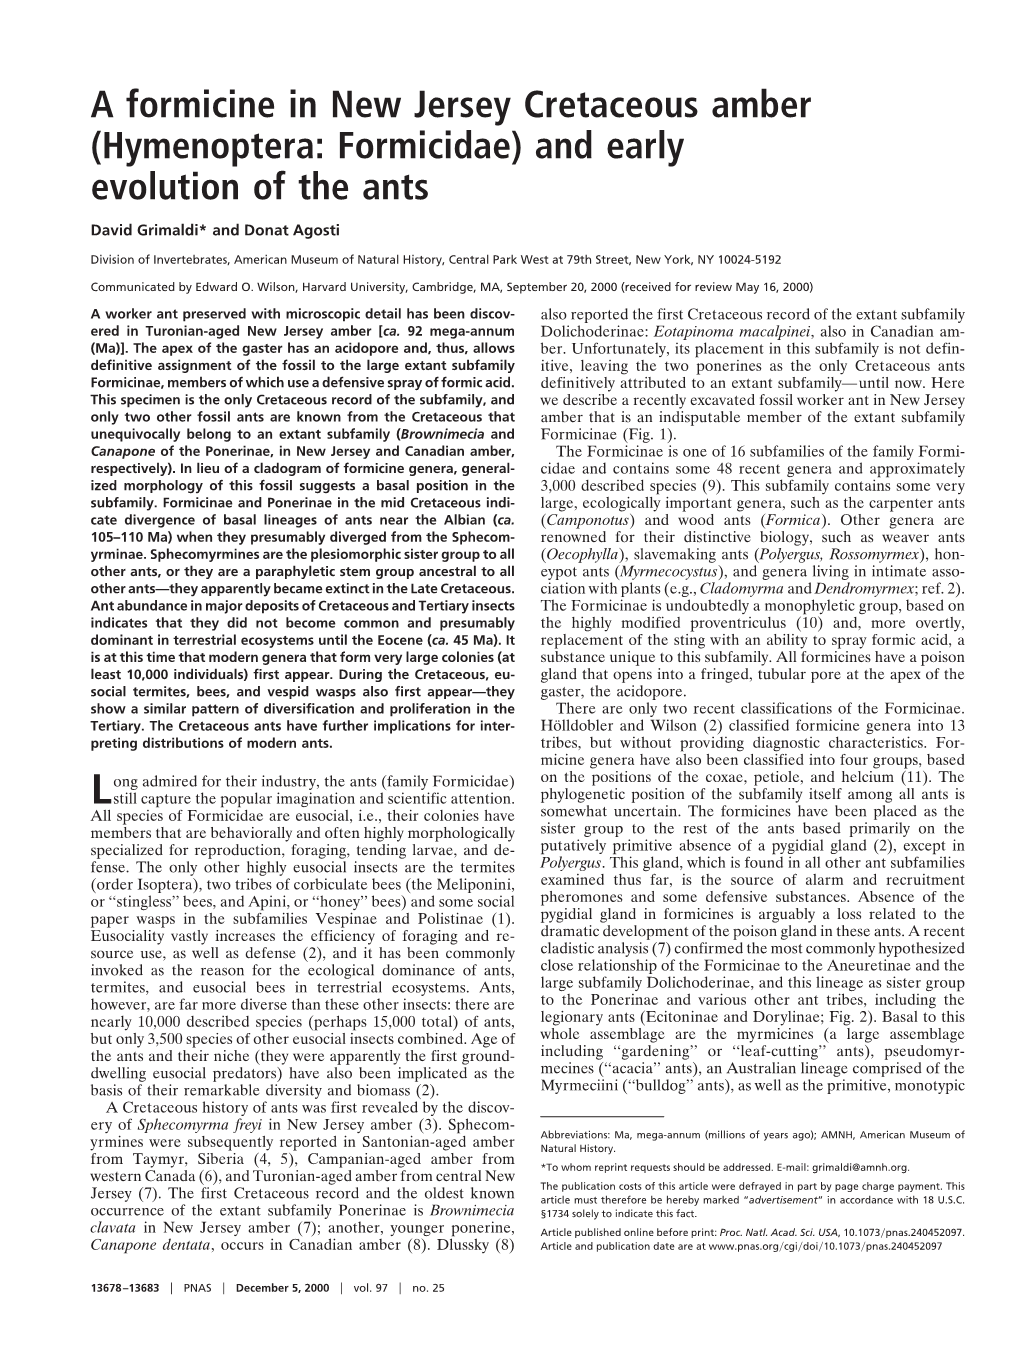 Hymenoptera: Formicidae) and Early Evolution of the Ants David Grimaldi* and Donat Agosti